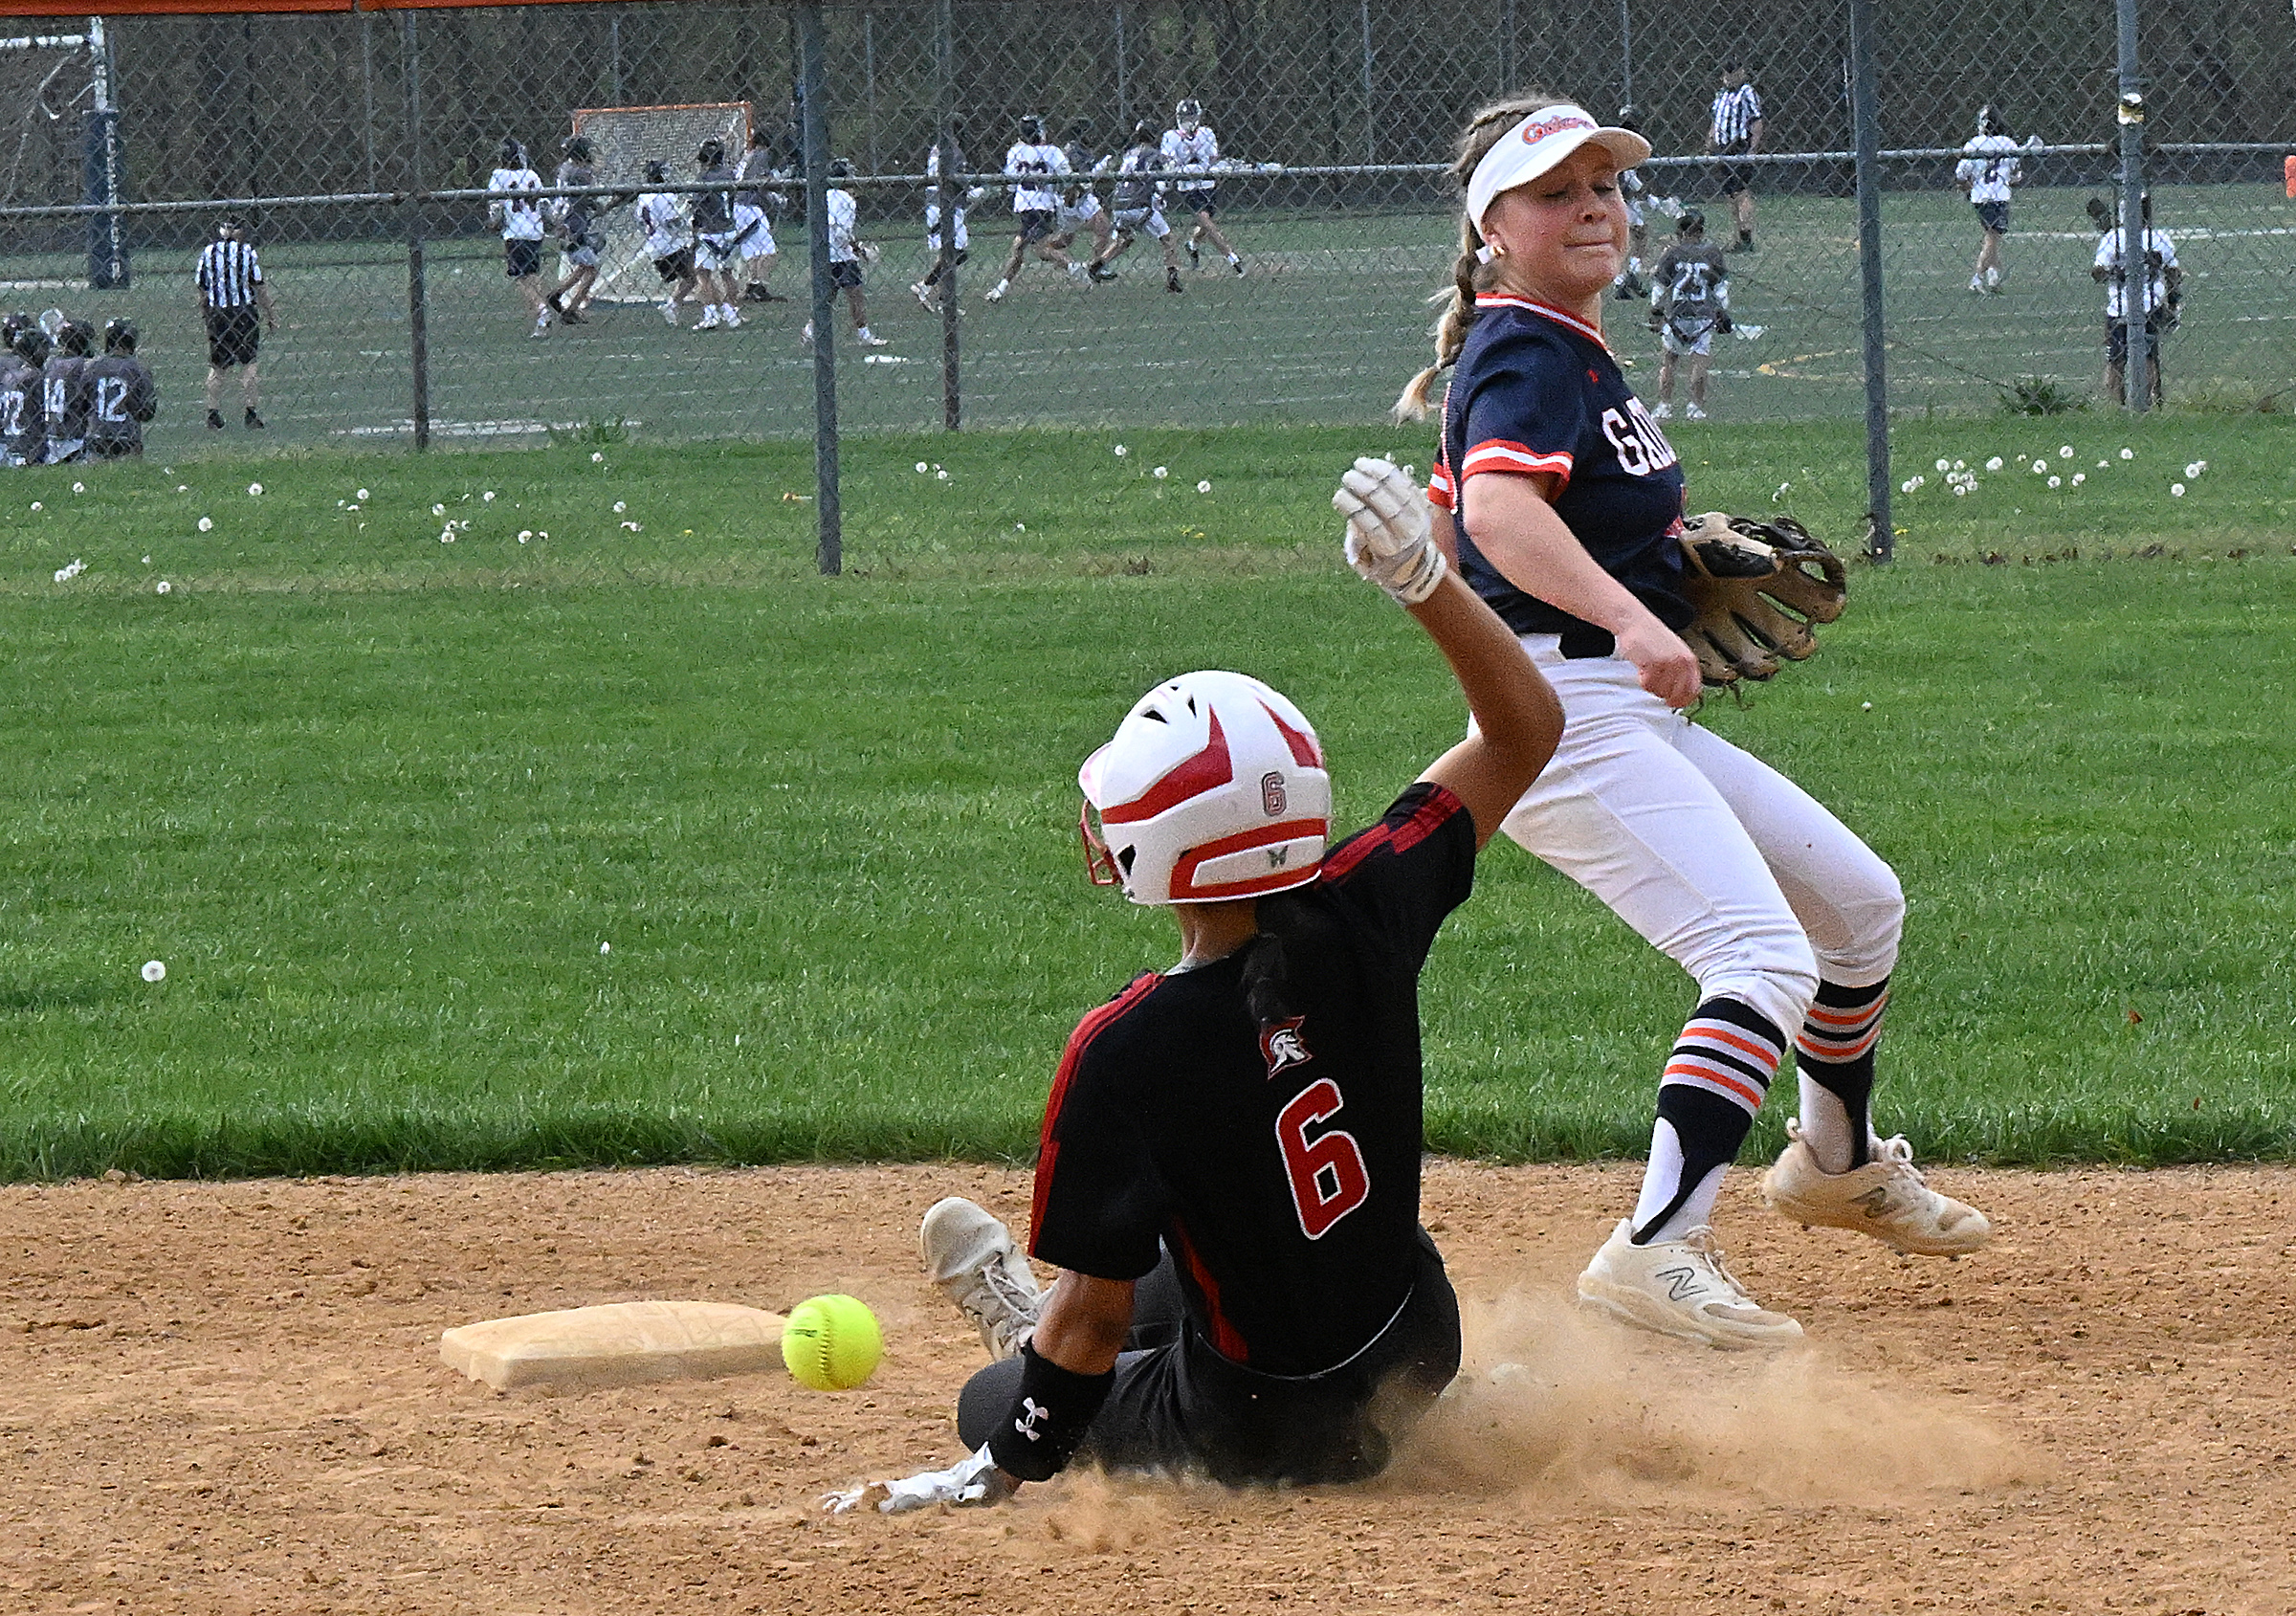 Glenelg #6, Abiola Owens, is hit by the ball on...